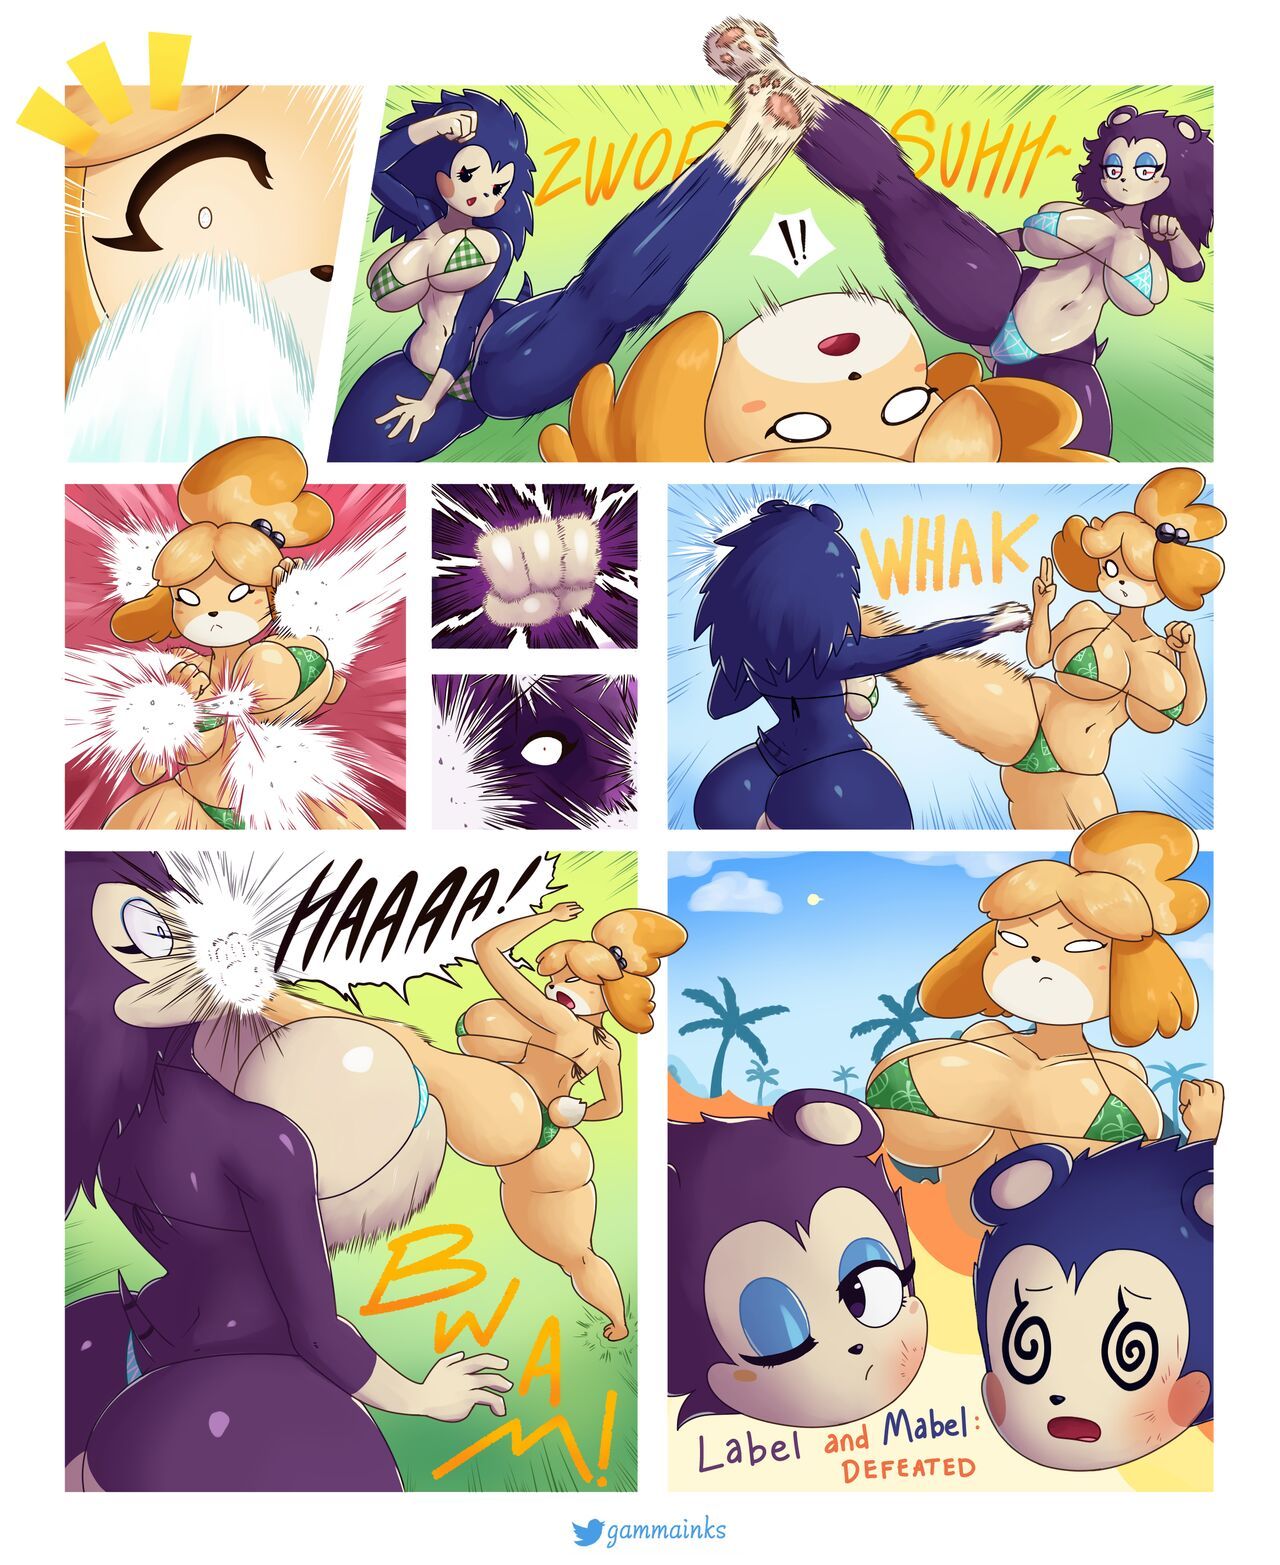 [Gammainks] Isabelle's challenge (Animal Crossing) [Ongoing] 3